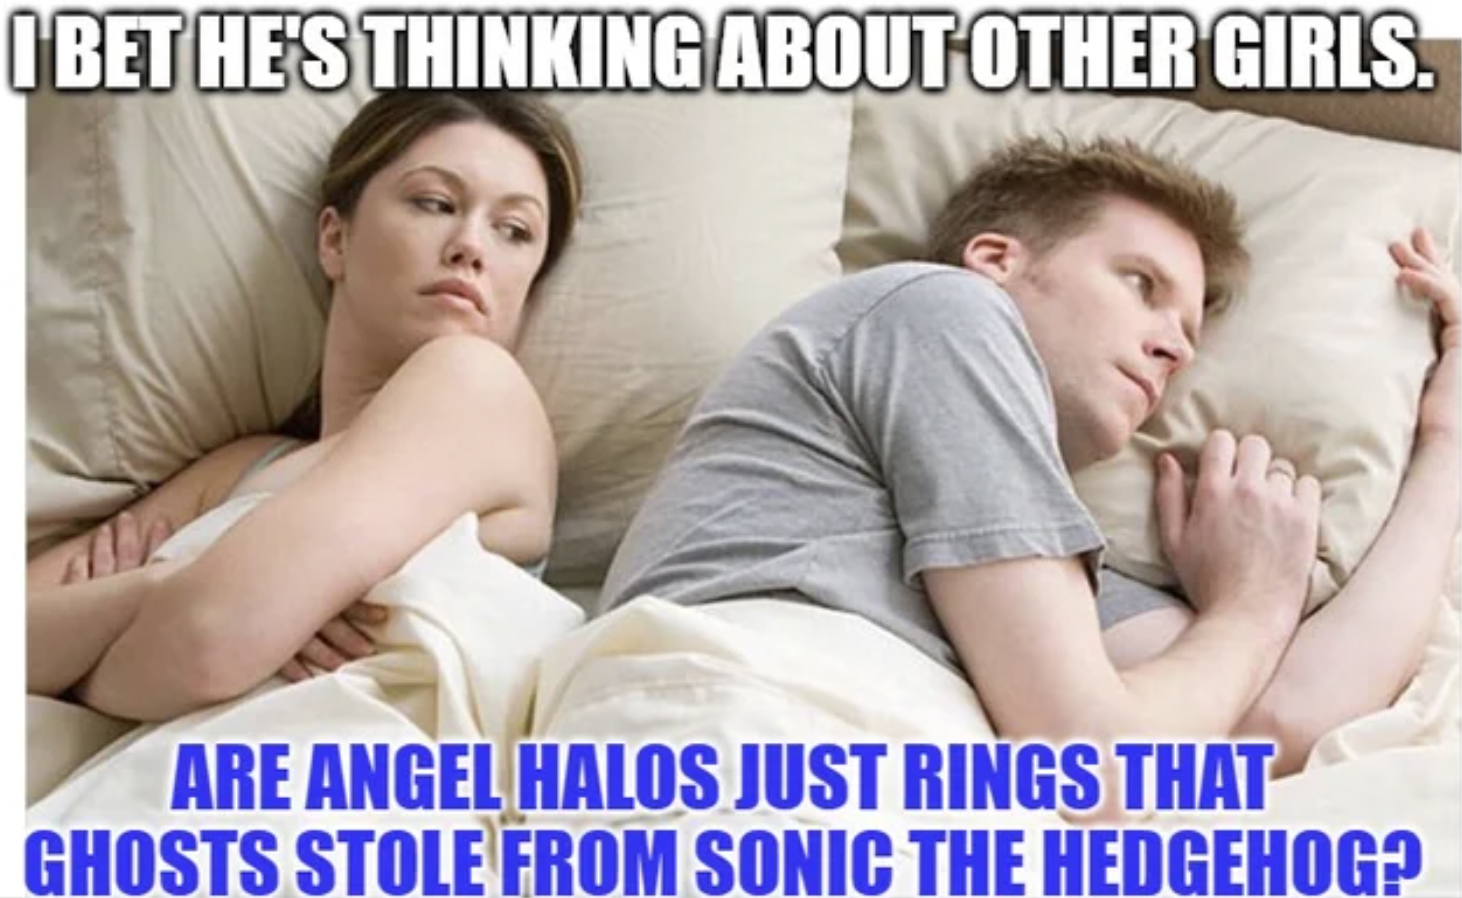 Gaming memes - bet he's thinking about other women meme - Ibet He'S Thinking About Other Girls. fals Are Angel Halos Just Rings That Ghosts Stole From Sonic The Hedgehog?